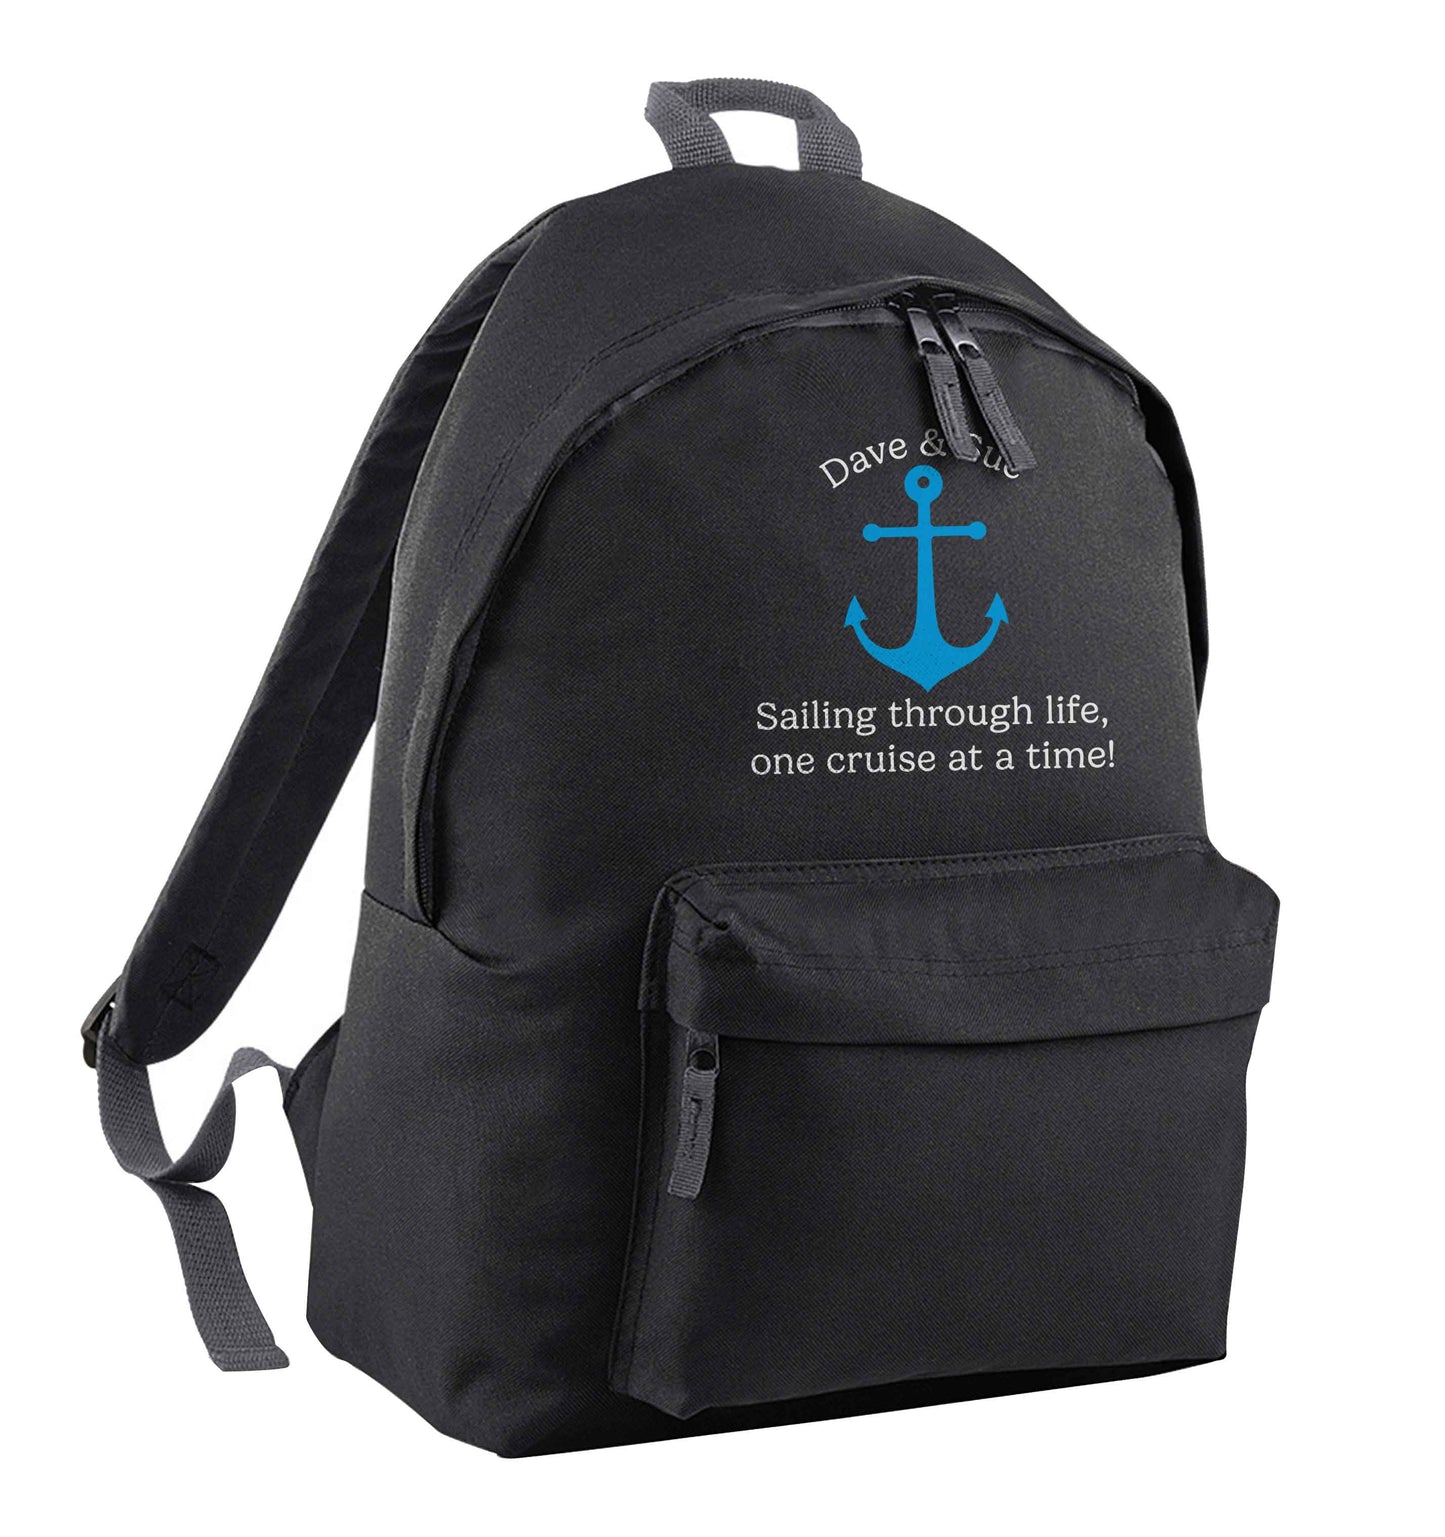 Sailing through life one cruise at a time - personalised black adults backpack